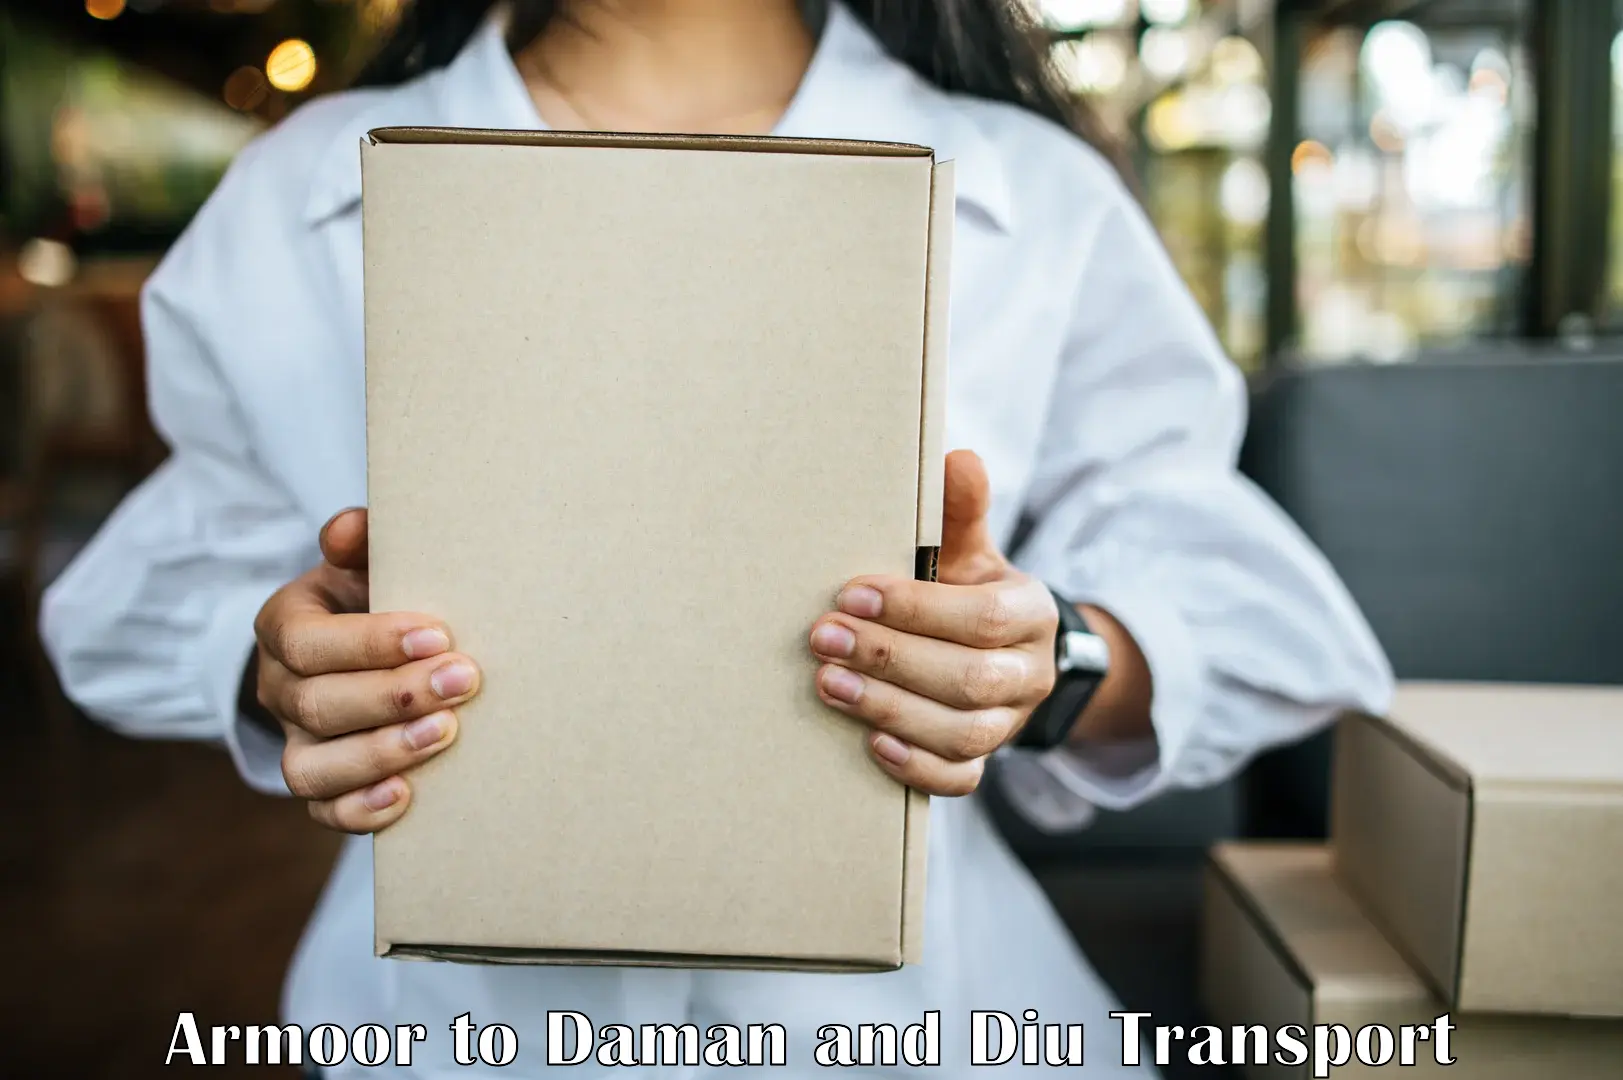 Nationwide transport services Armoor to Daman and Diu